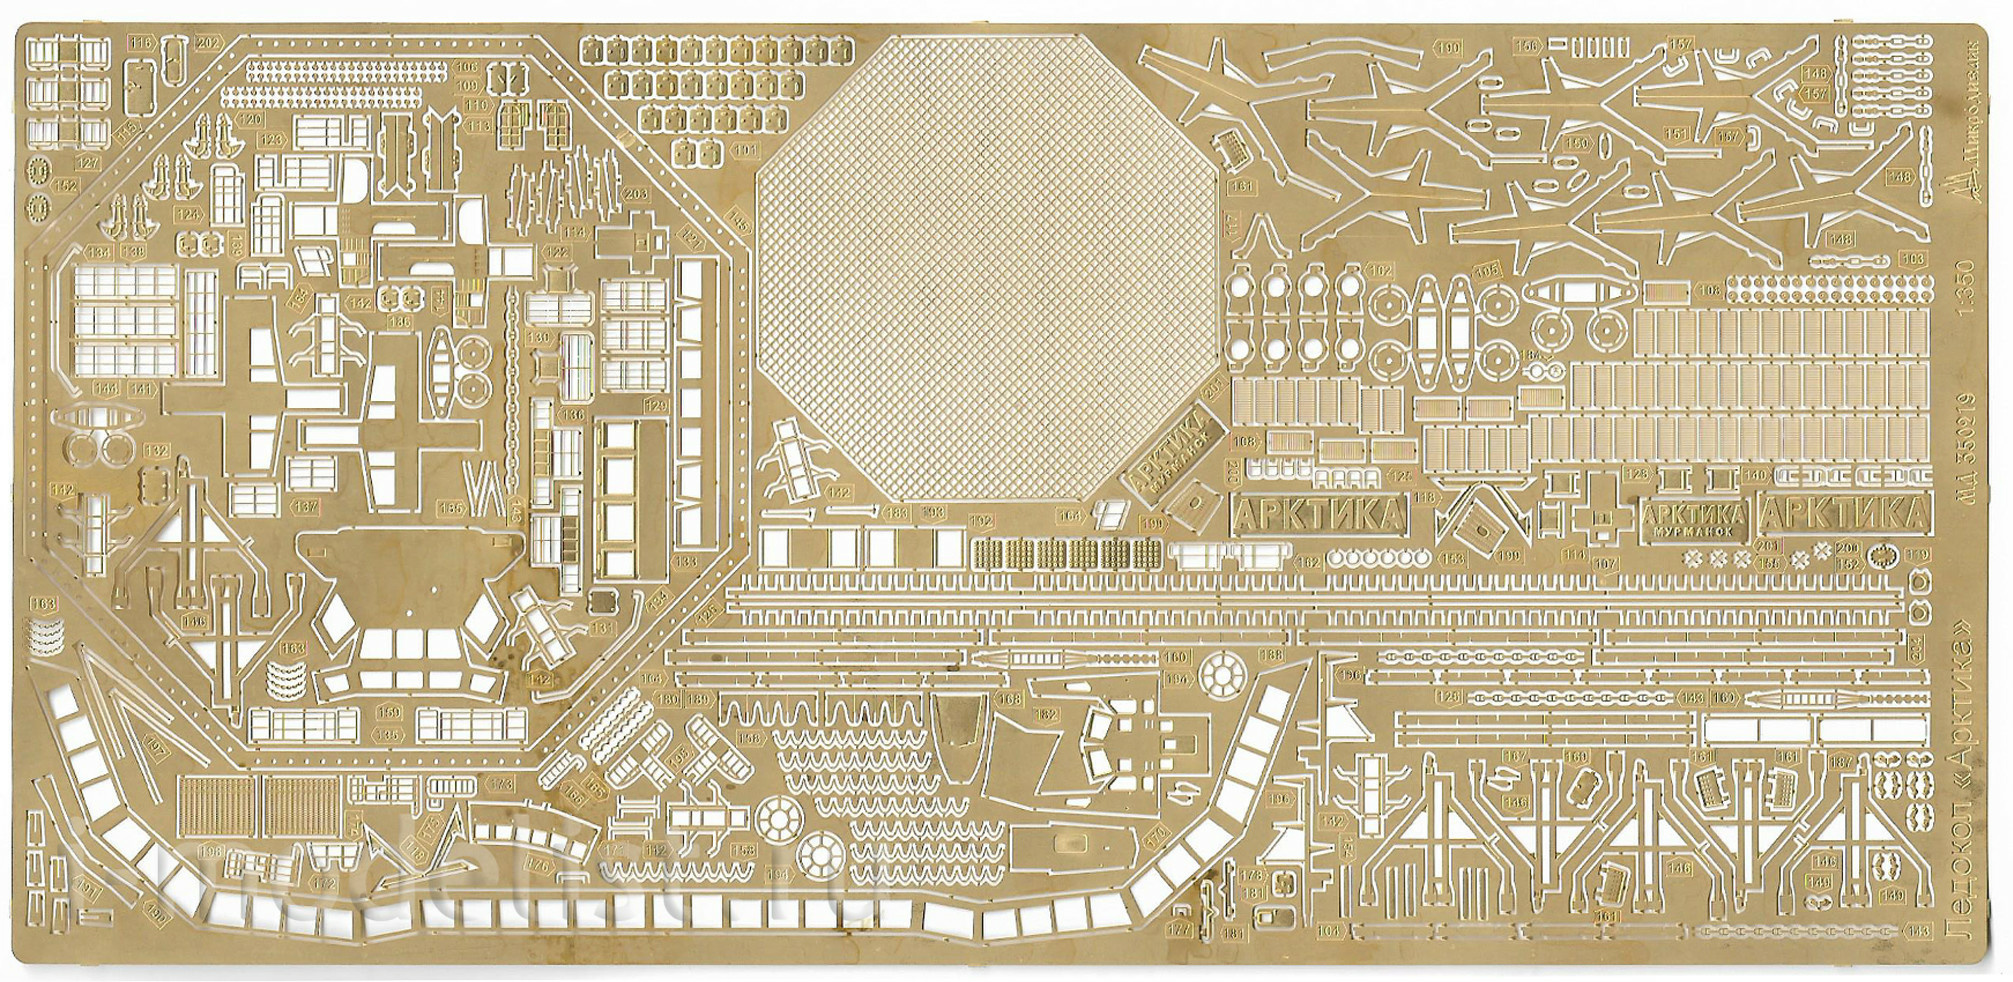 350219 Microdesign 1/350 Photo etching kit for the icebreaker 